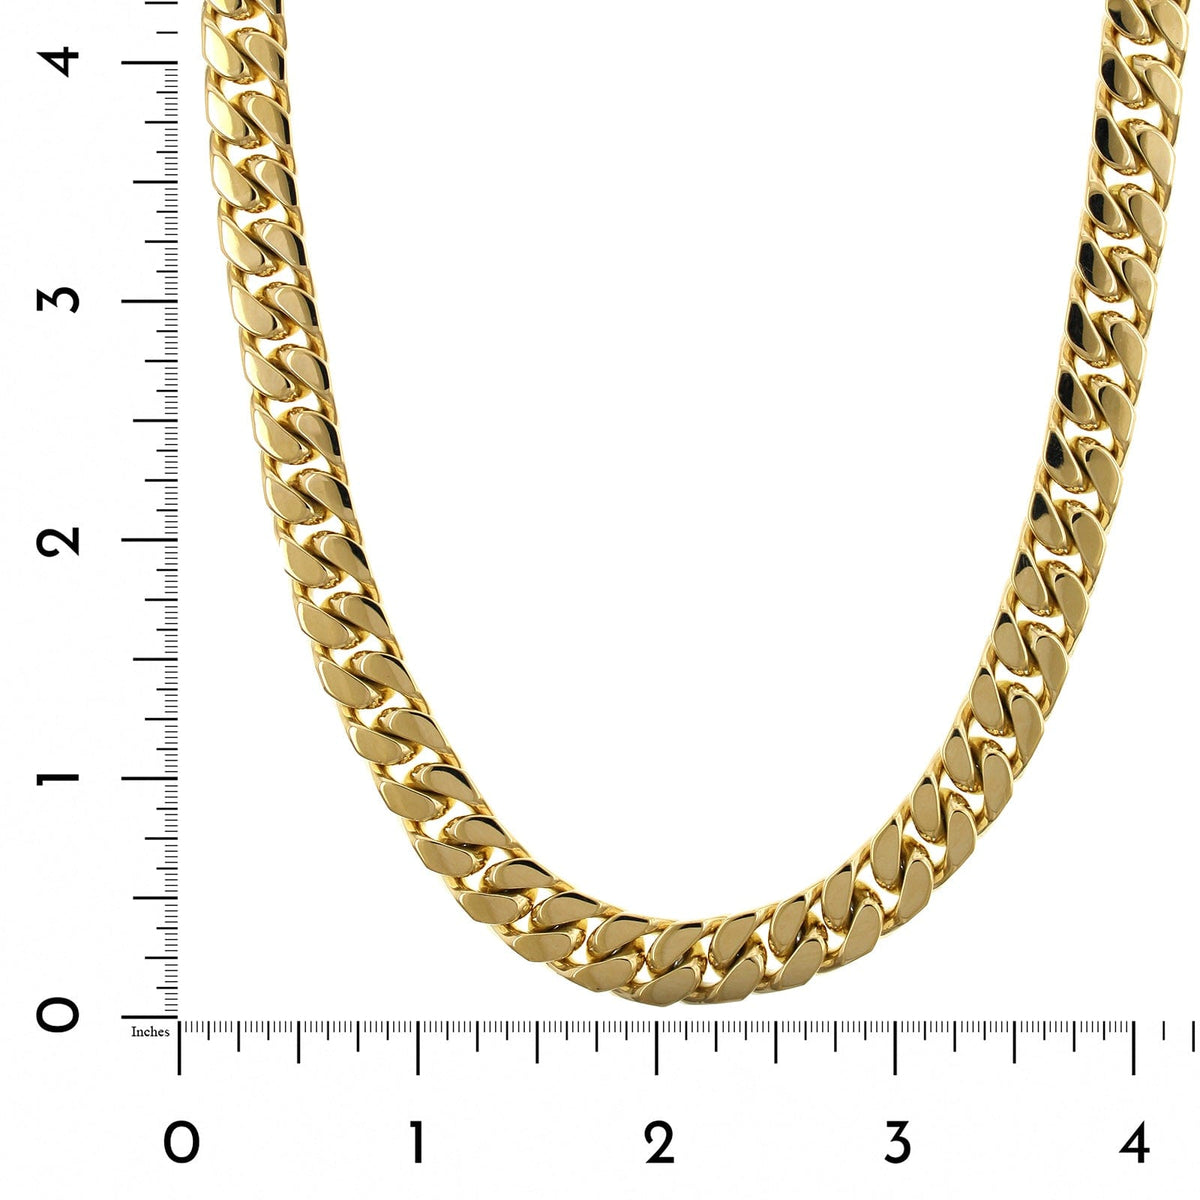 18K Yellow Gold Heavy Curb Chain